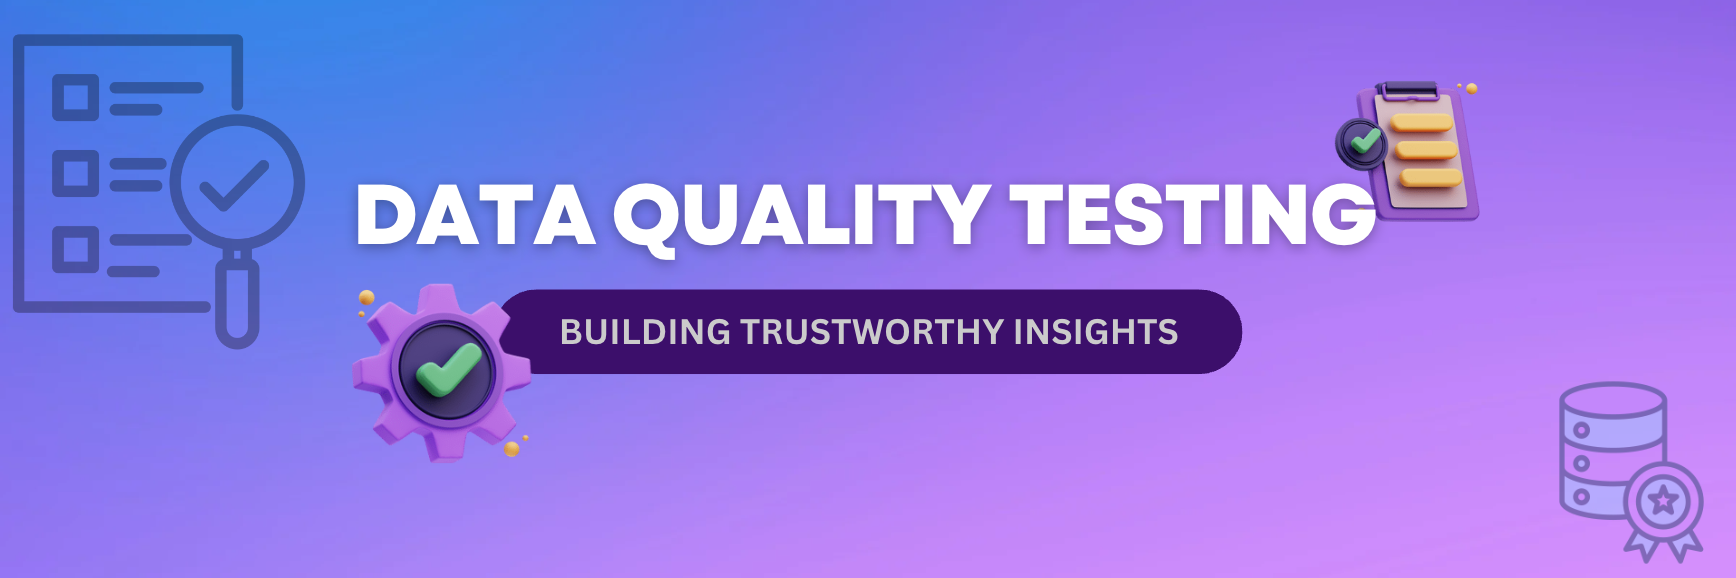 Data Quality Testing Cover image